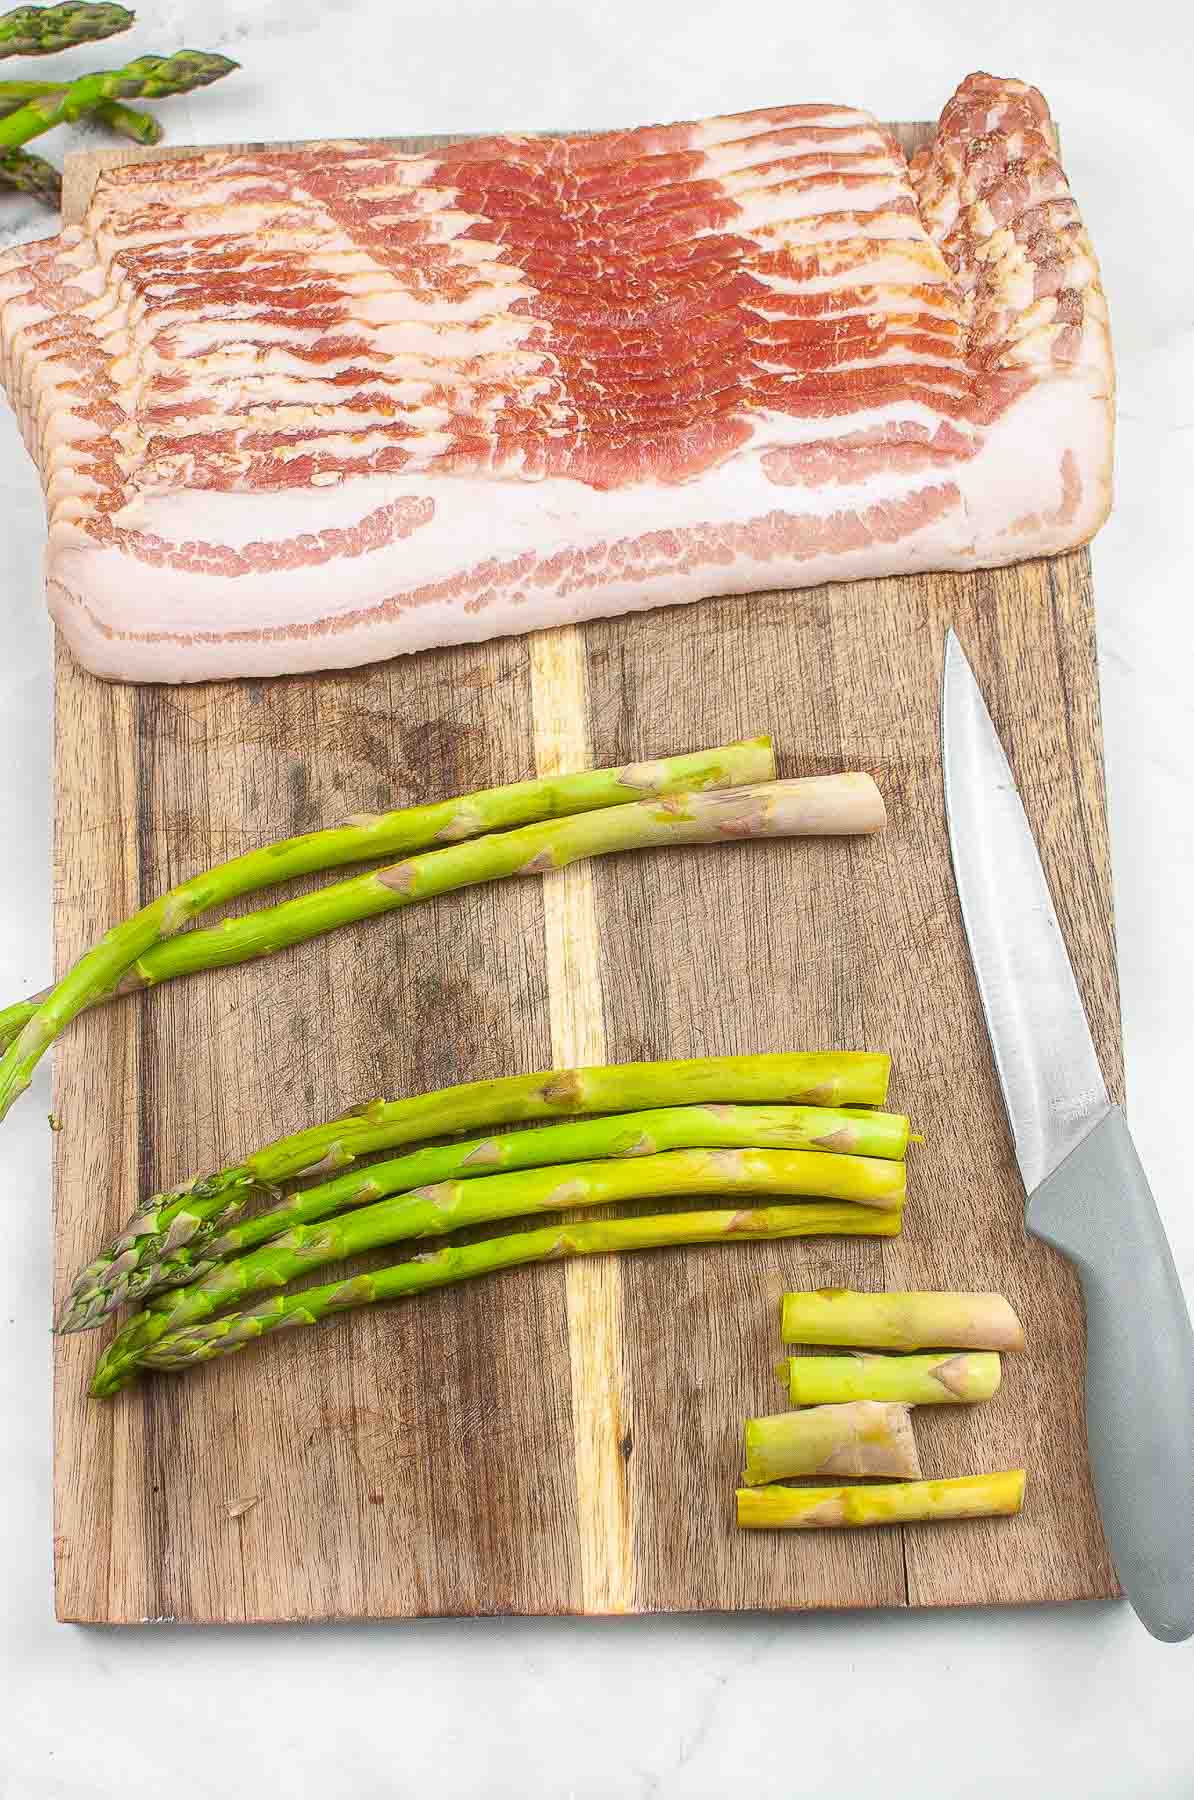 raw bacon slices and four spears of asparagus on a wood cutting board with the ends cut off.